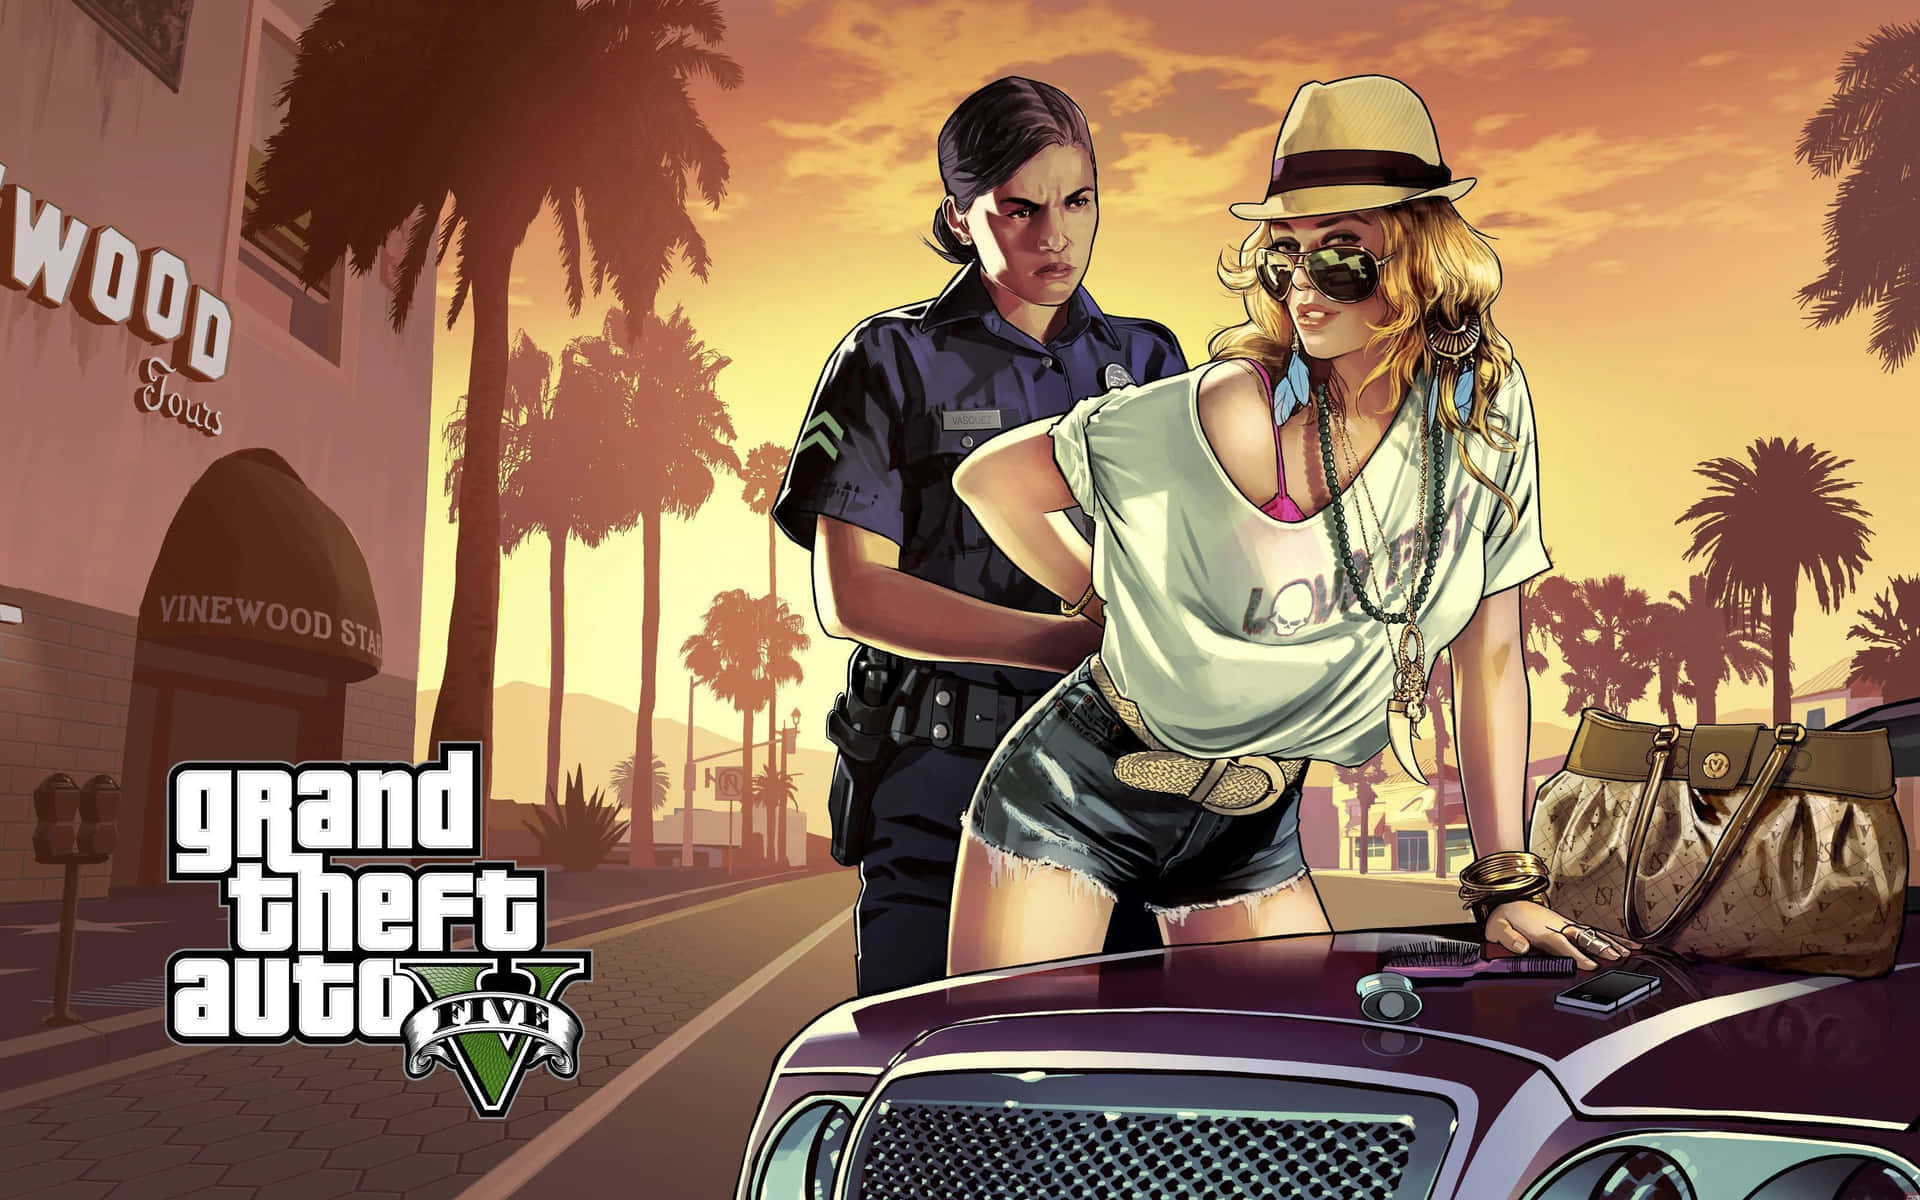 Take your skills to the streets in Grand Theft Auto V